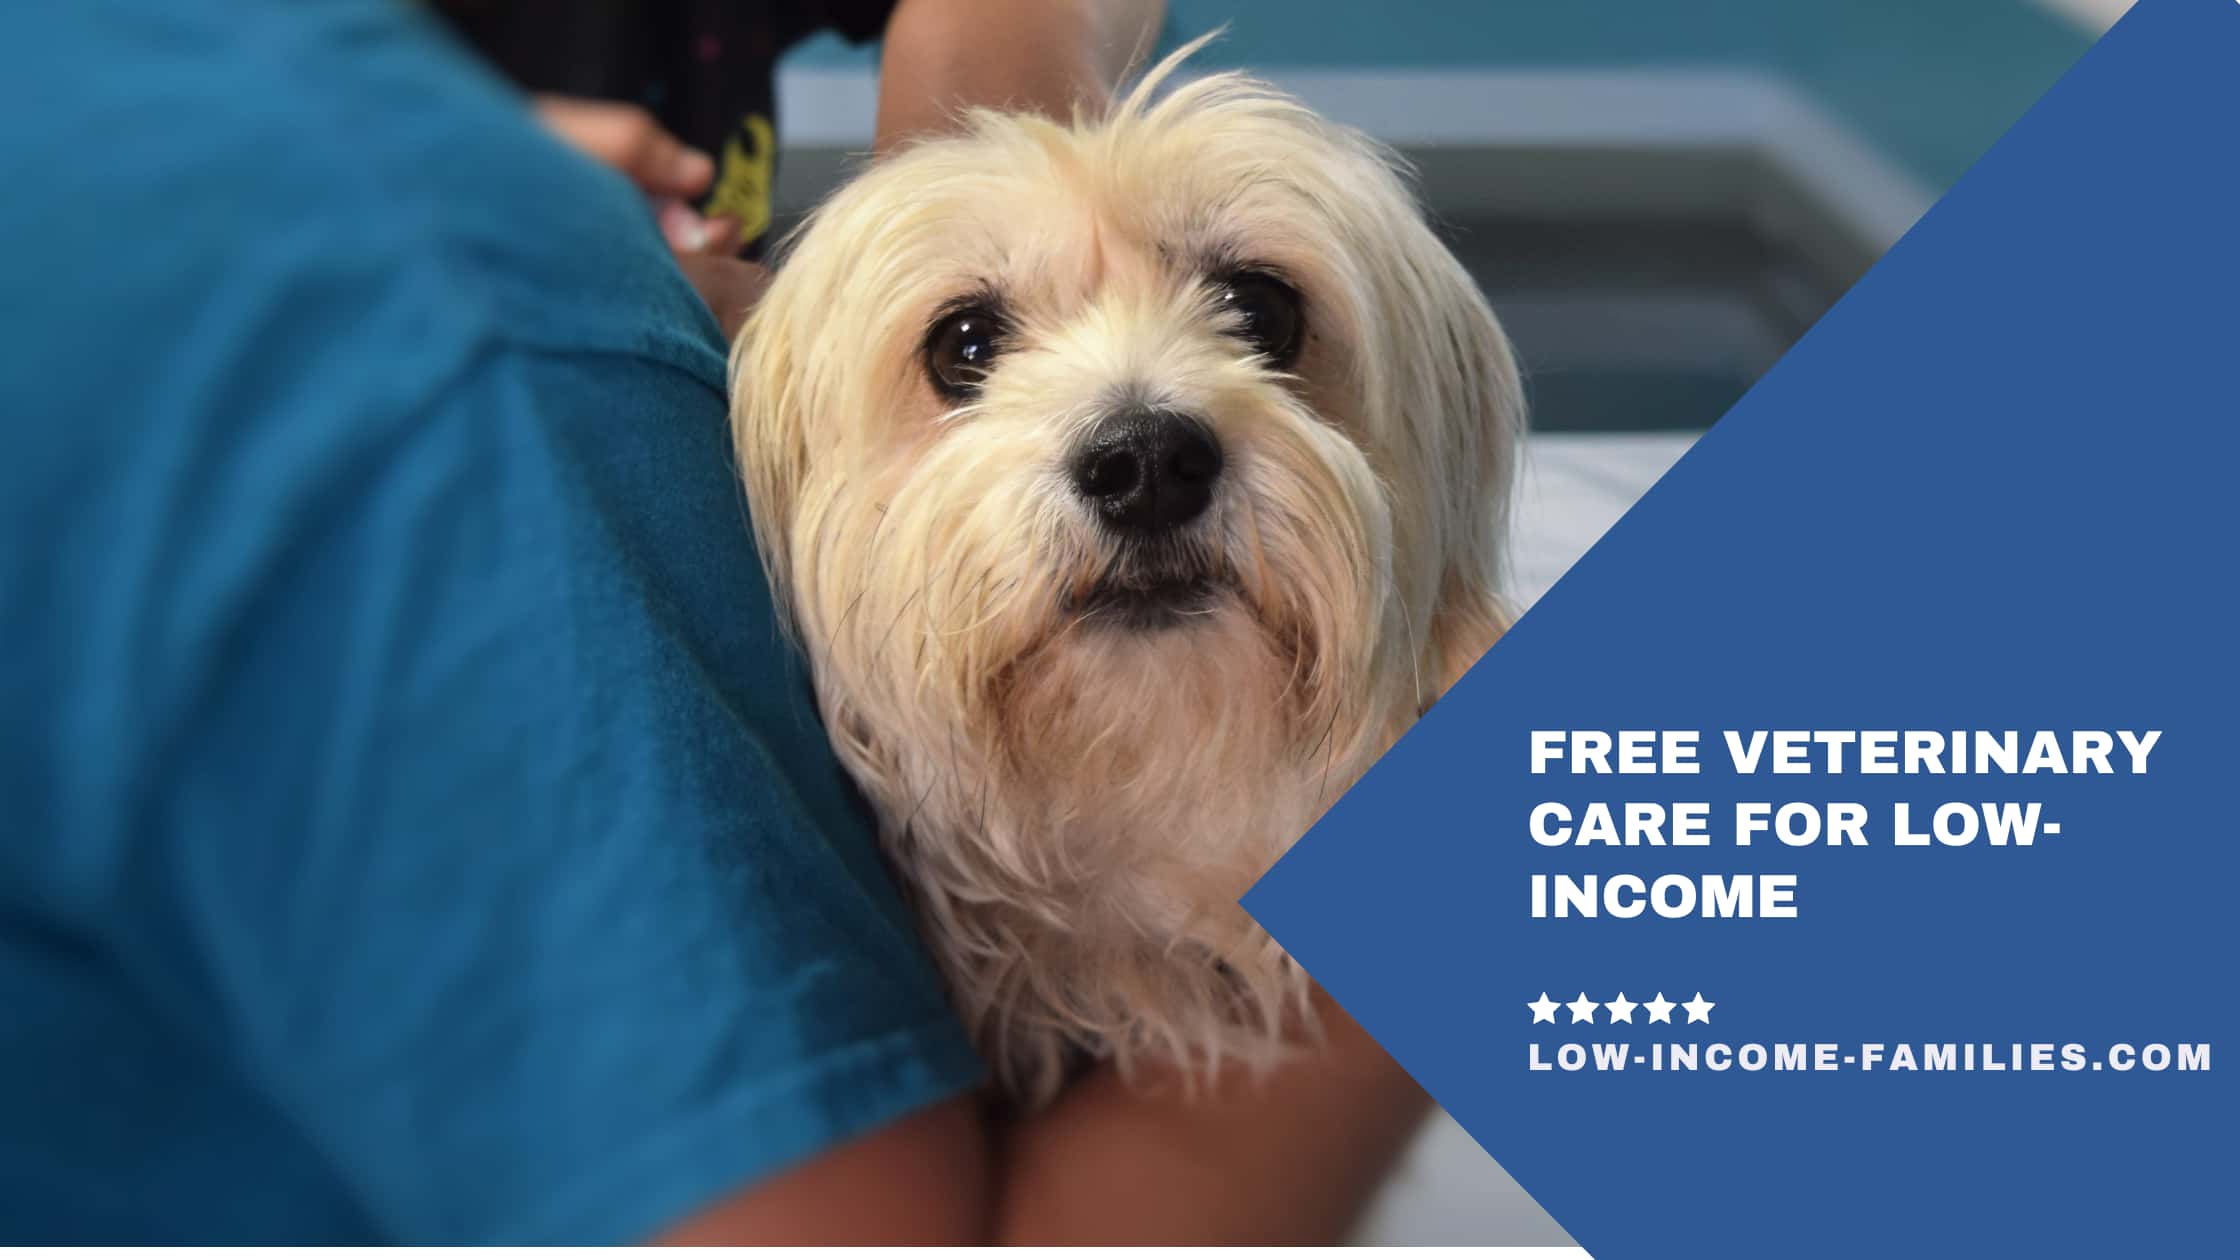 Free Veterinary Care for Low-Income